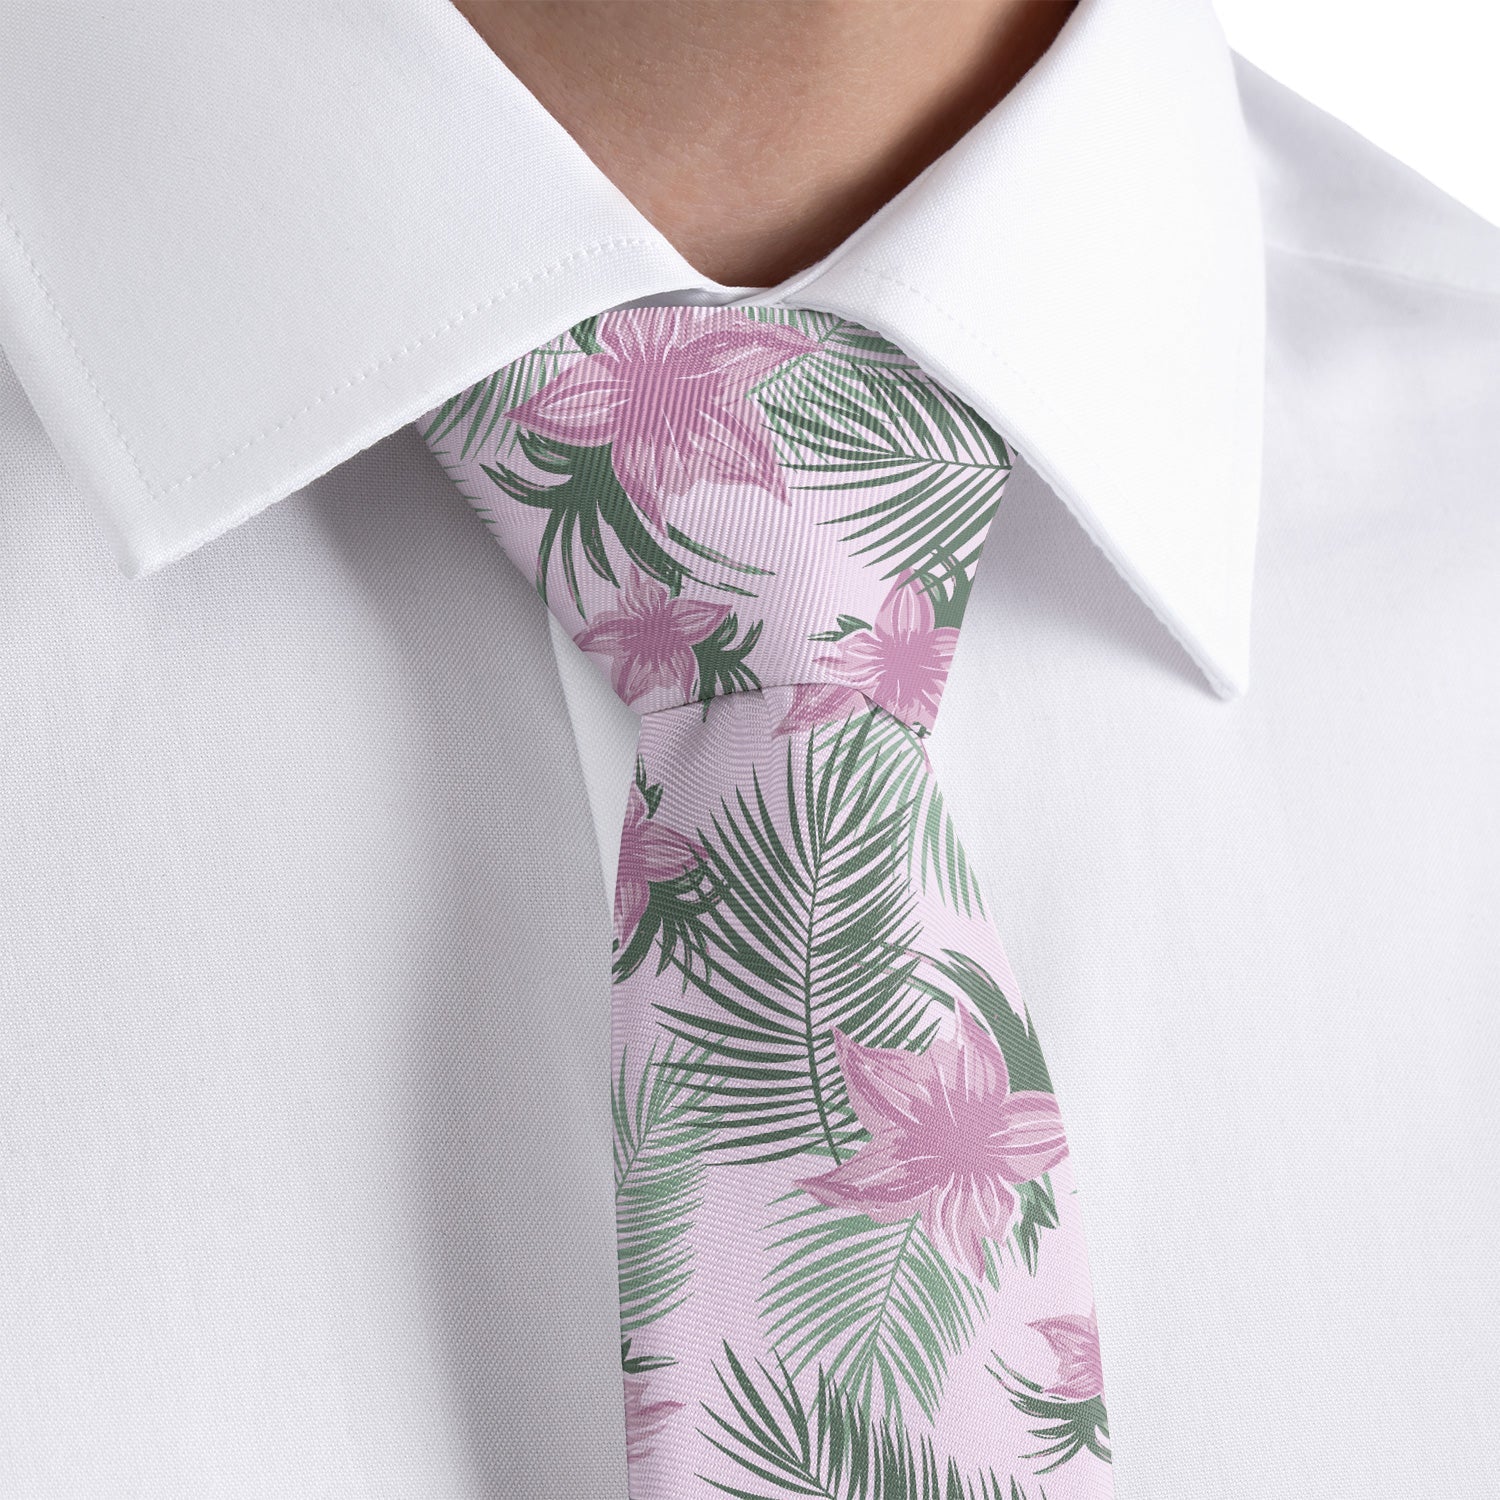 Tropical Blooms Necktie - Rolled - Knotty Tie Co.